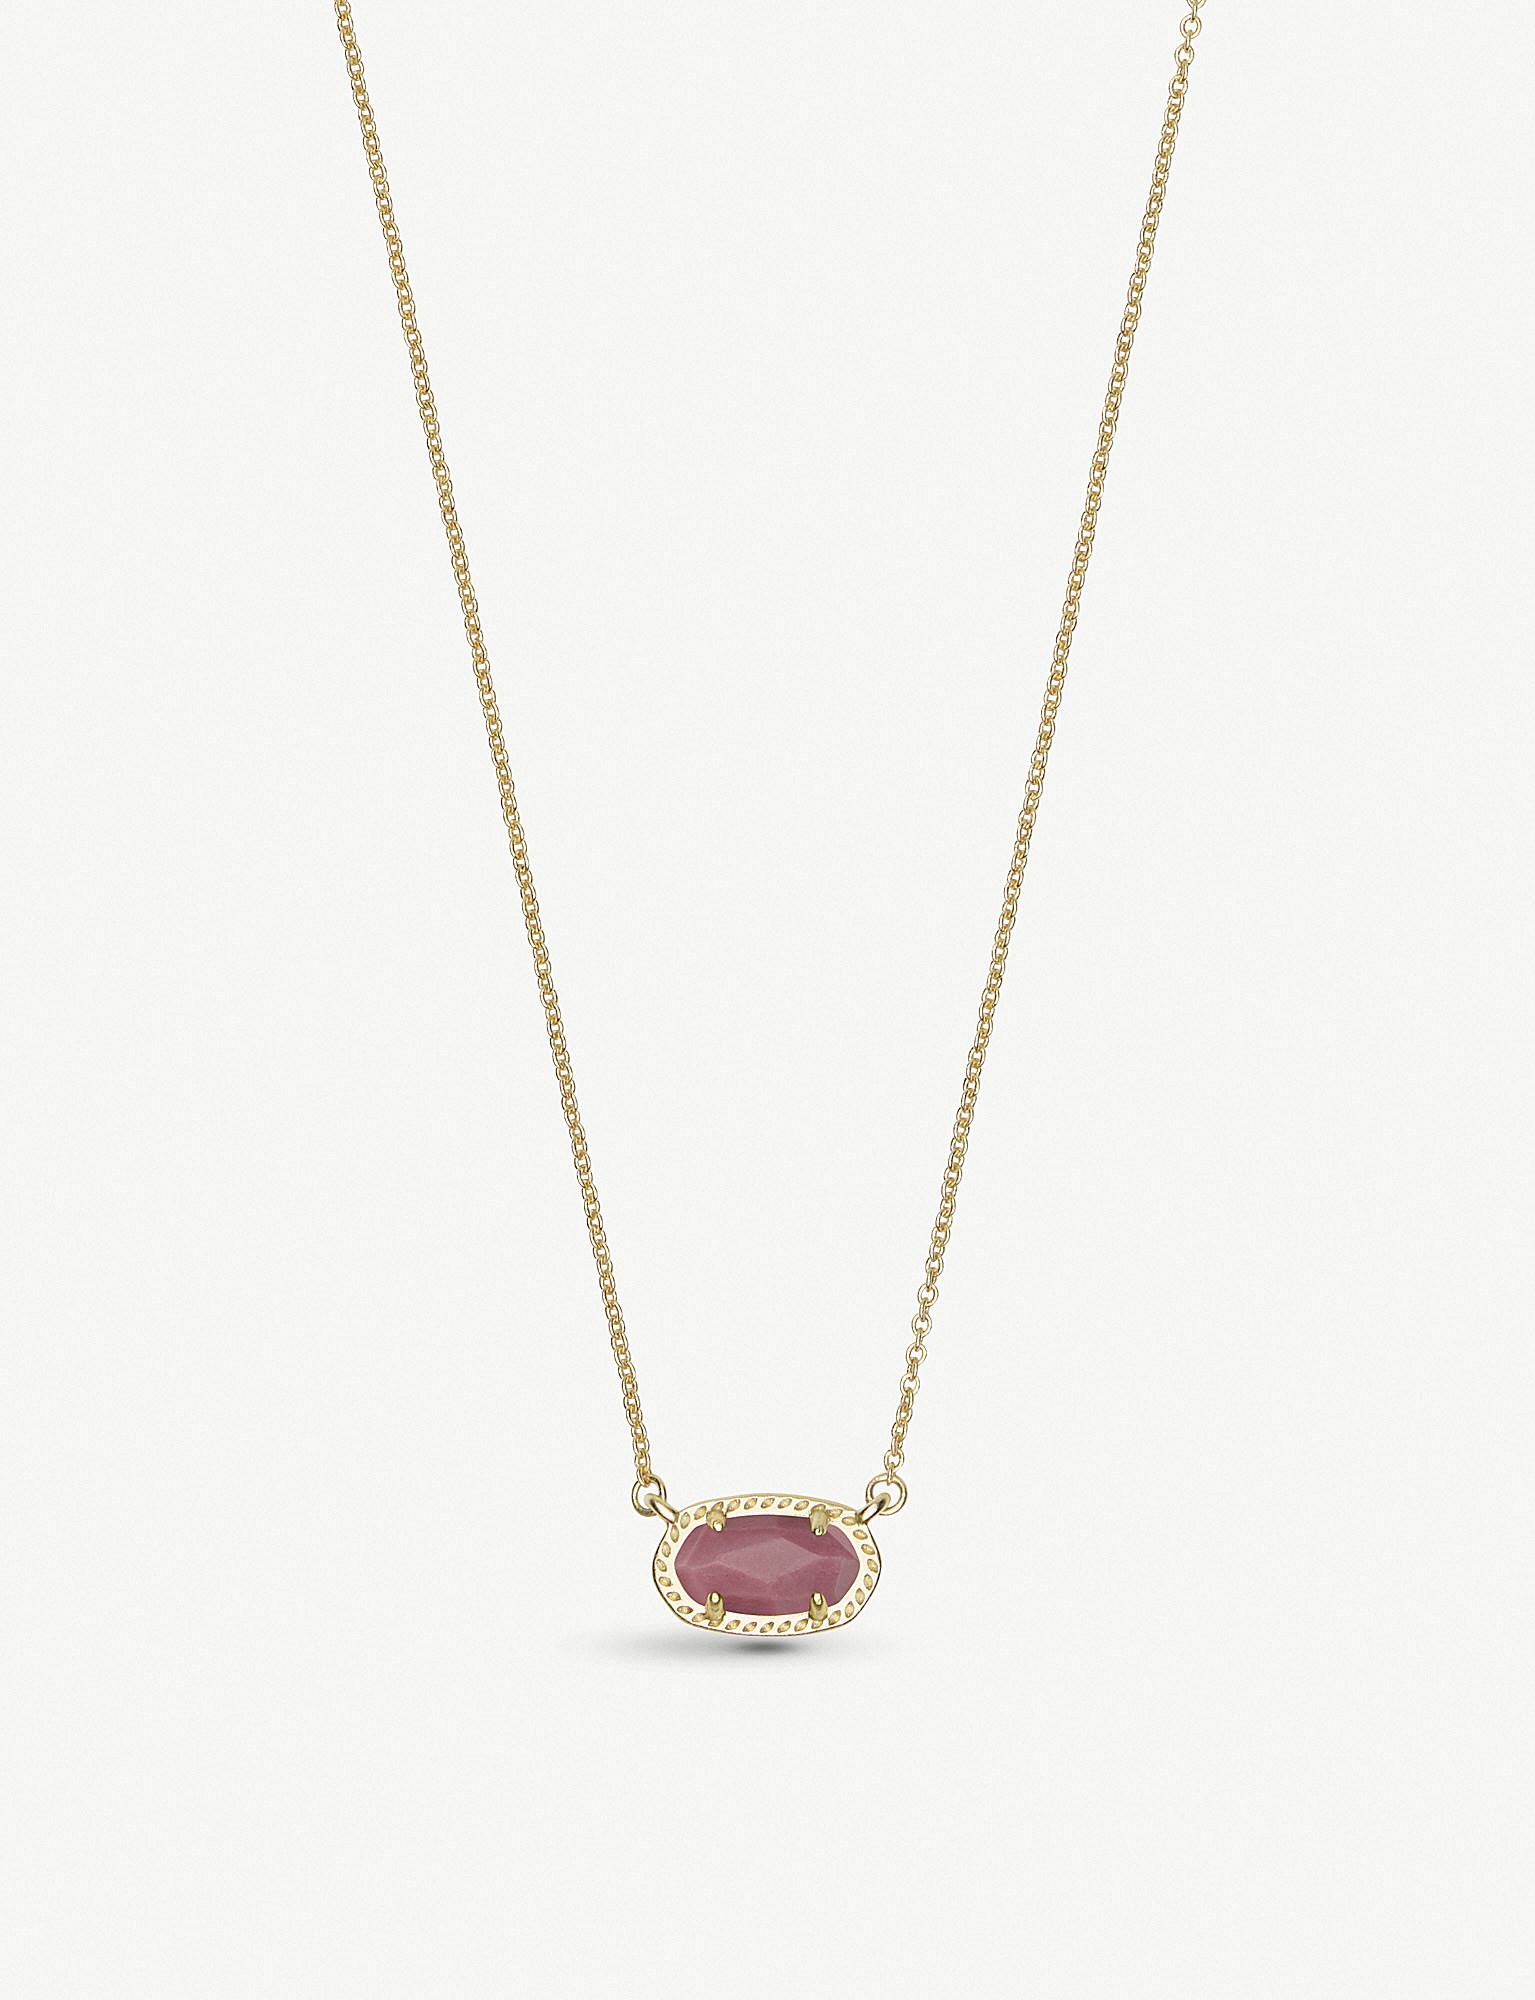 Lyst - Kendra Scott Ember 14ct Yellow Gold-plated And Pink ...